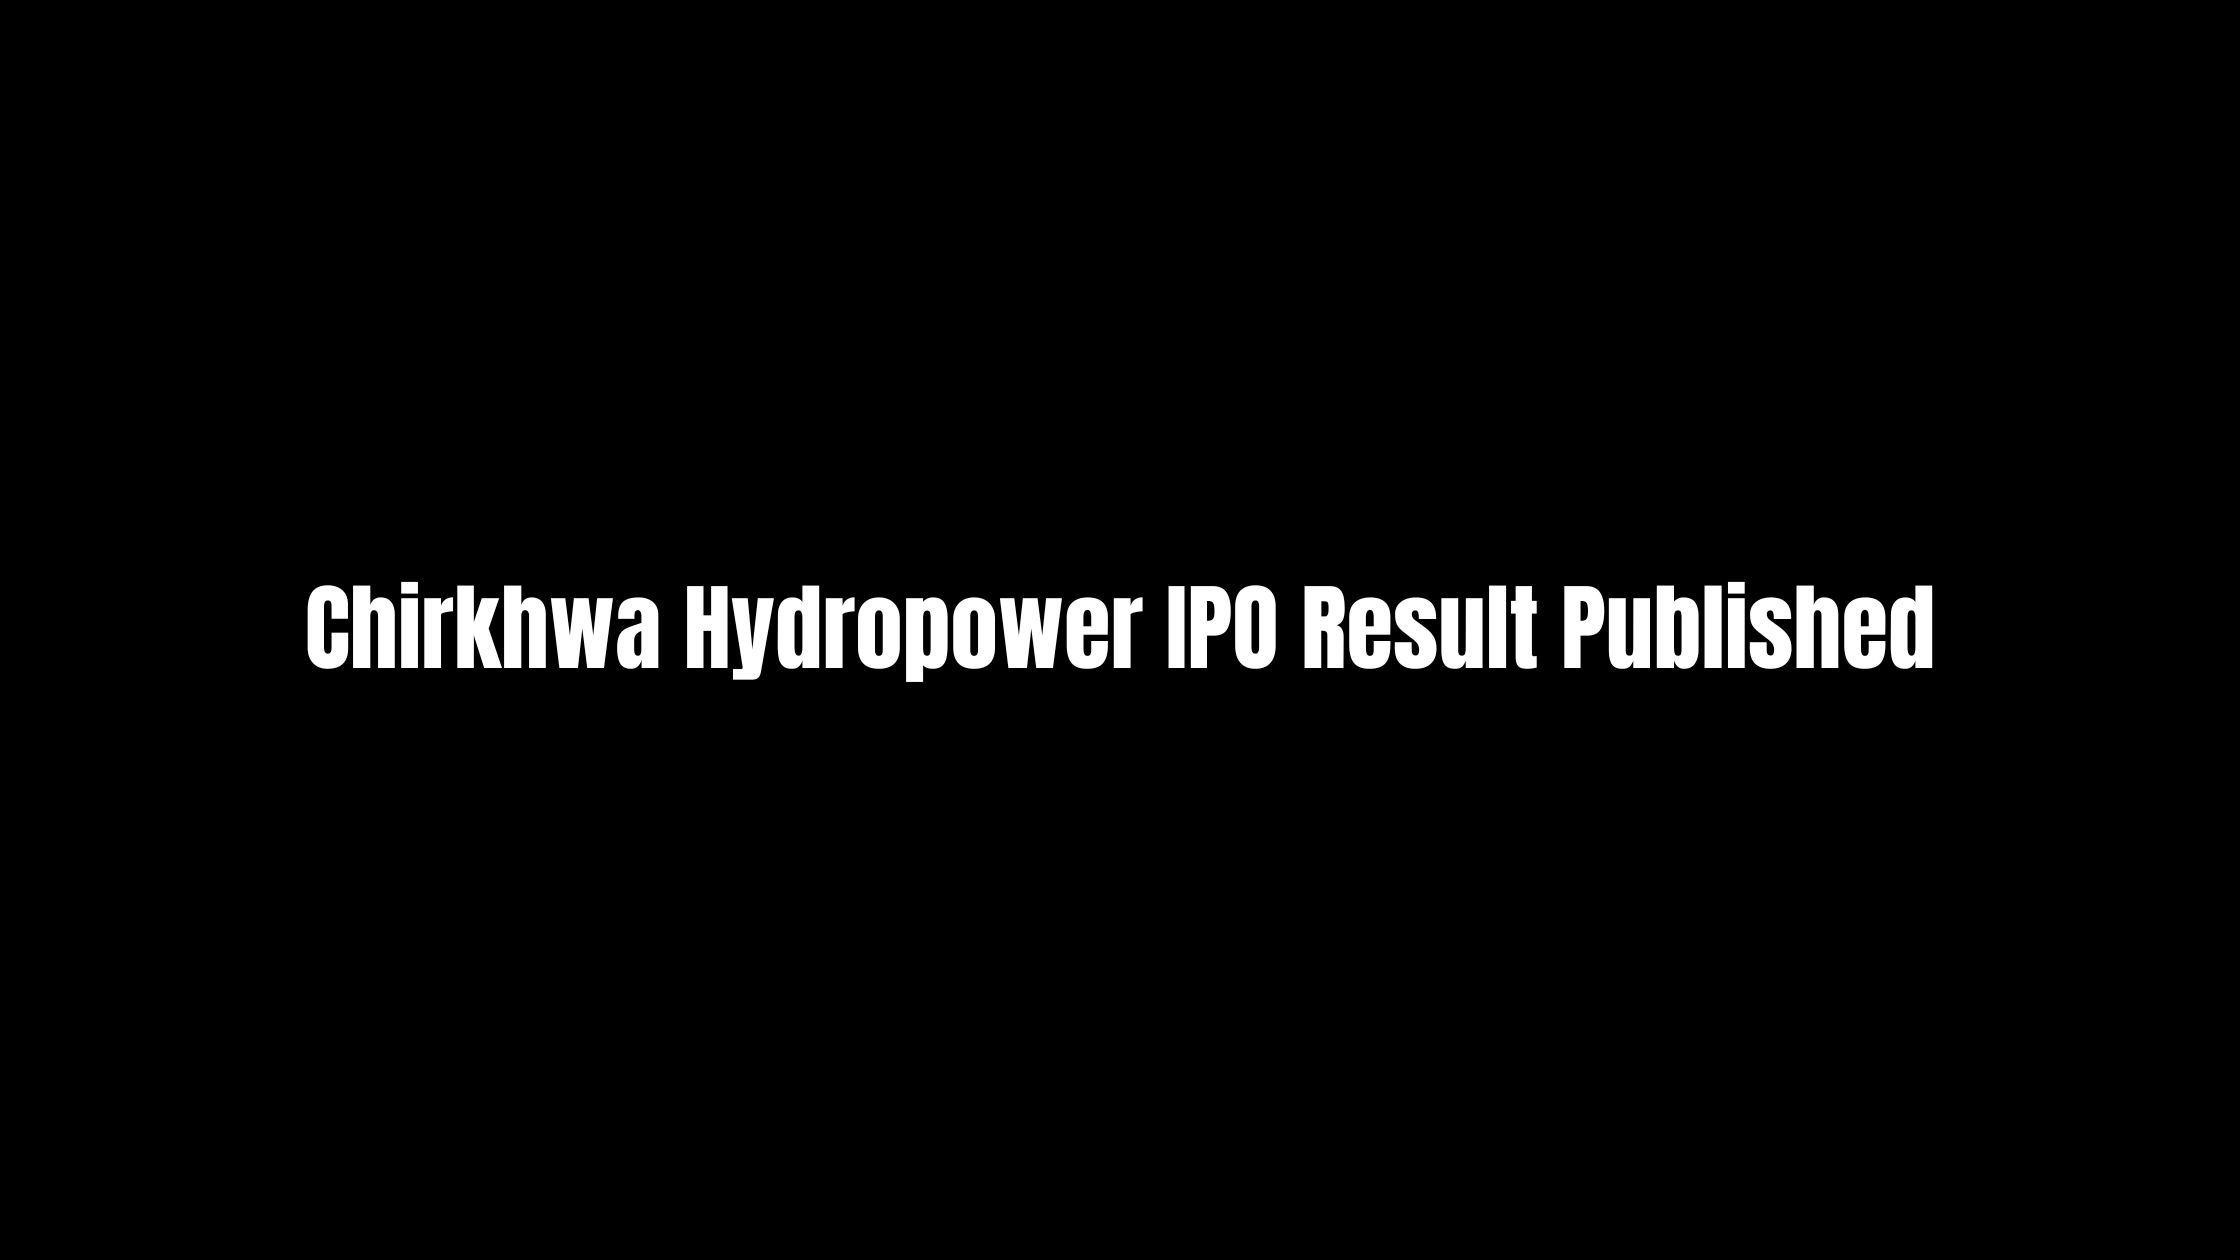 Chirkhwa Hydropower IPO Result Published